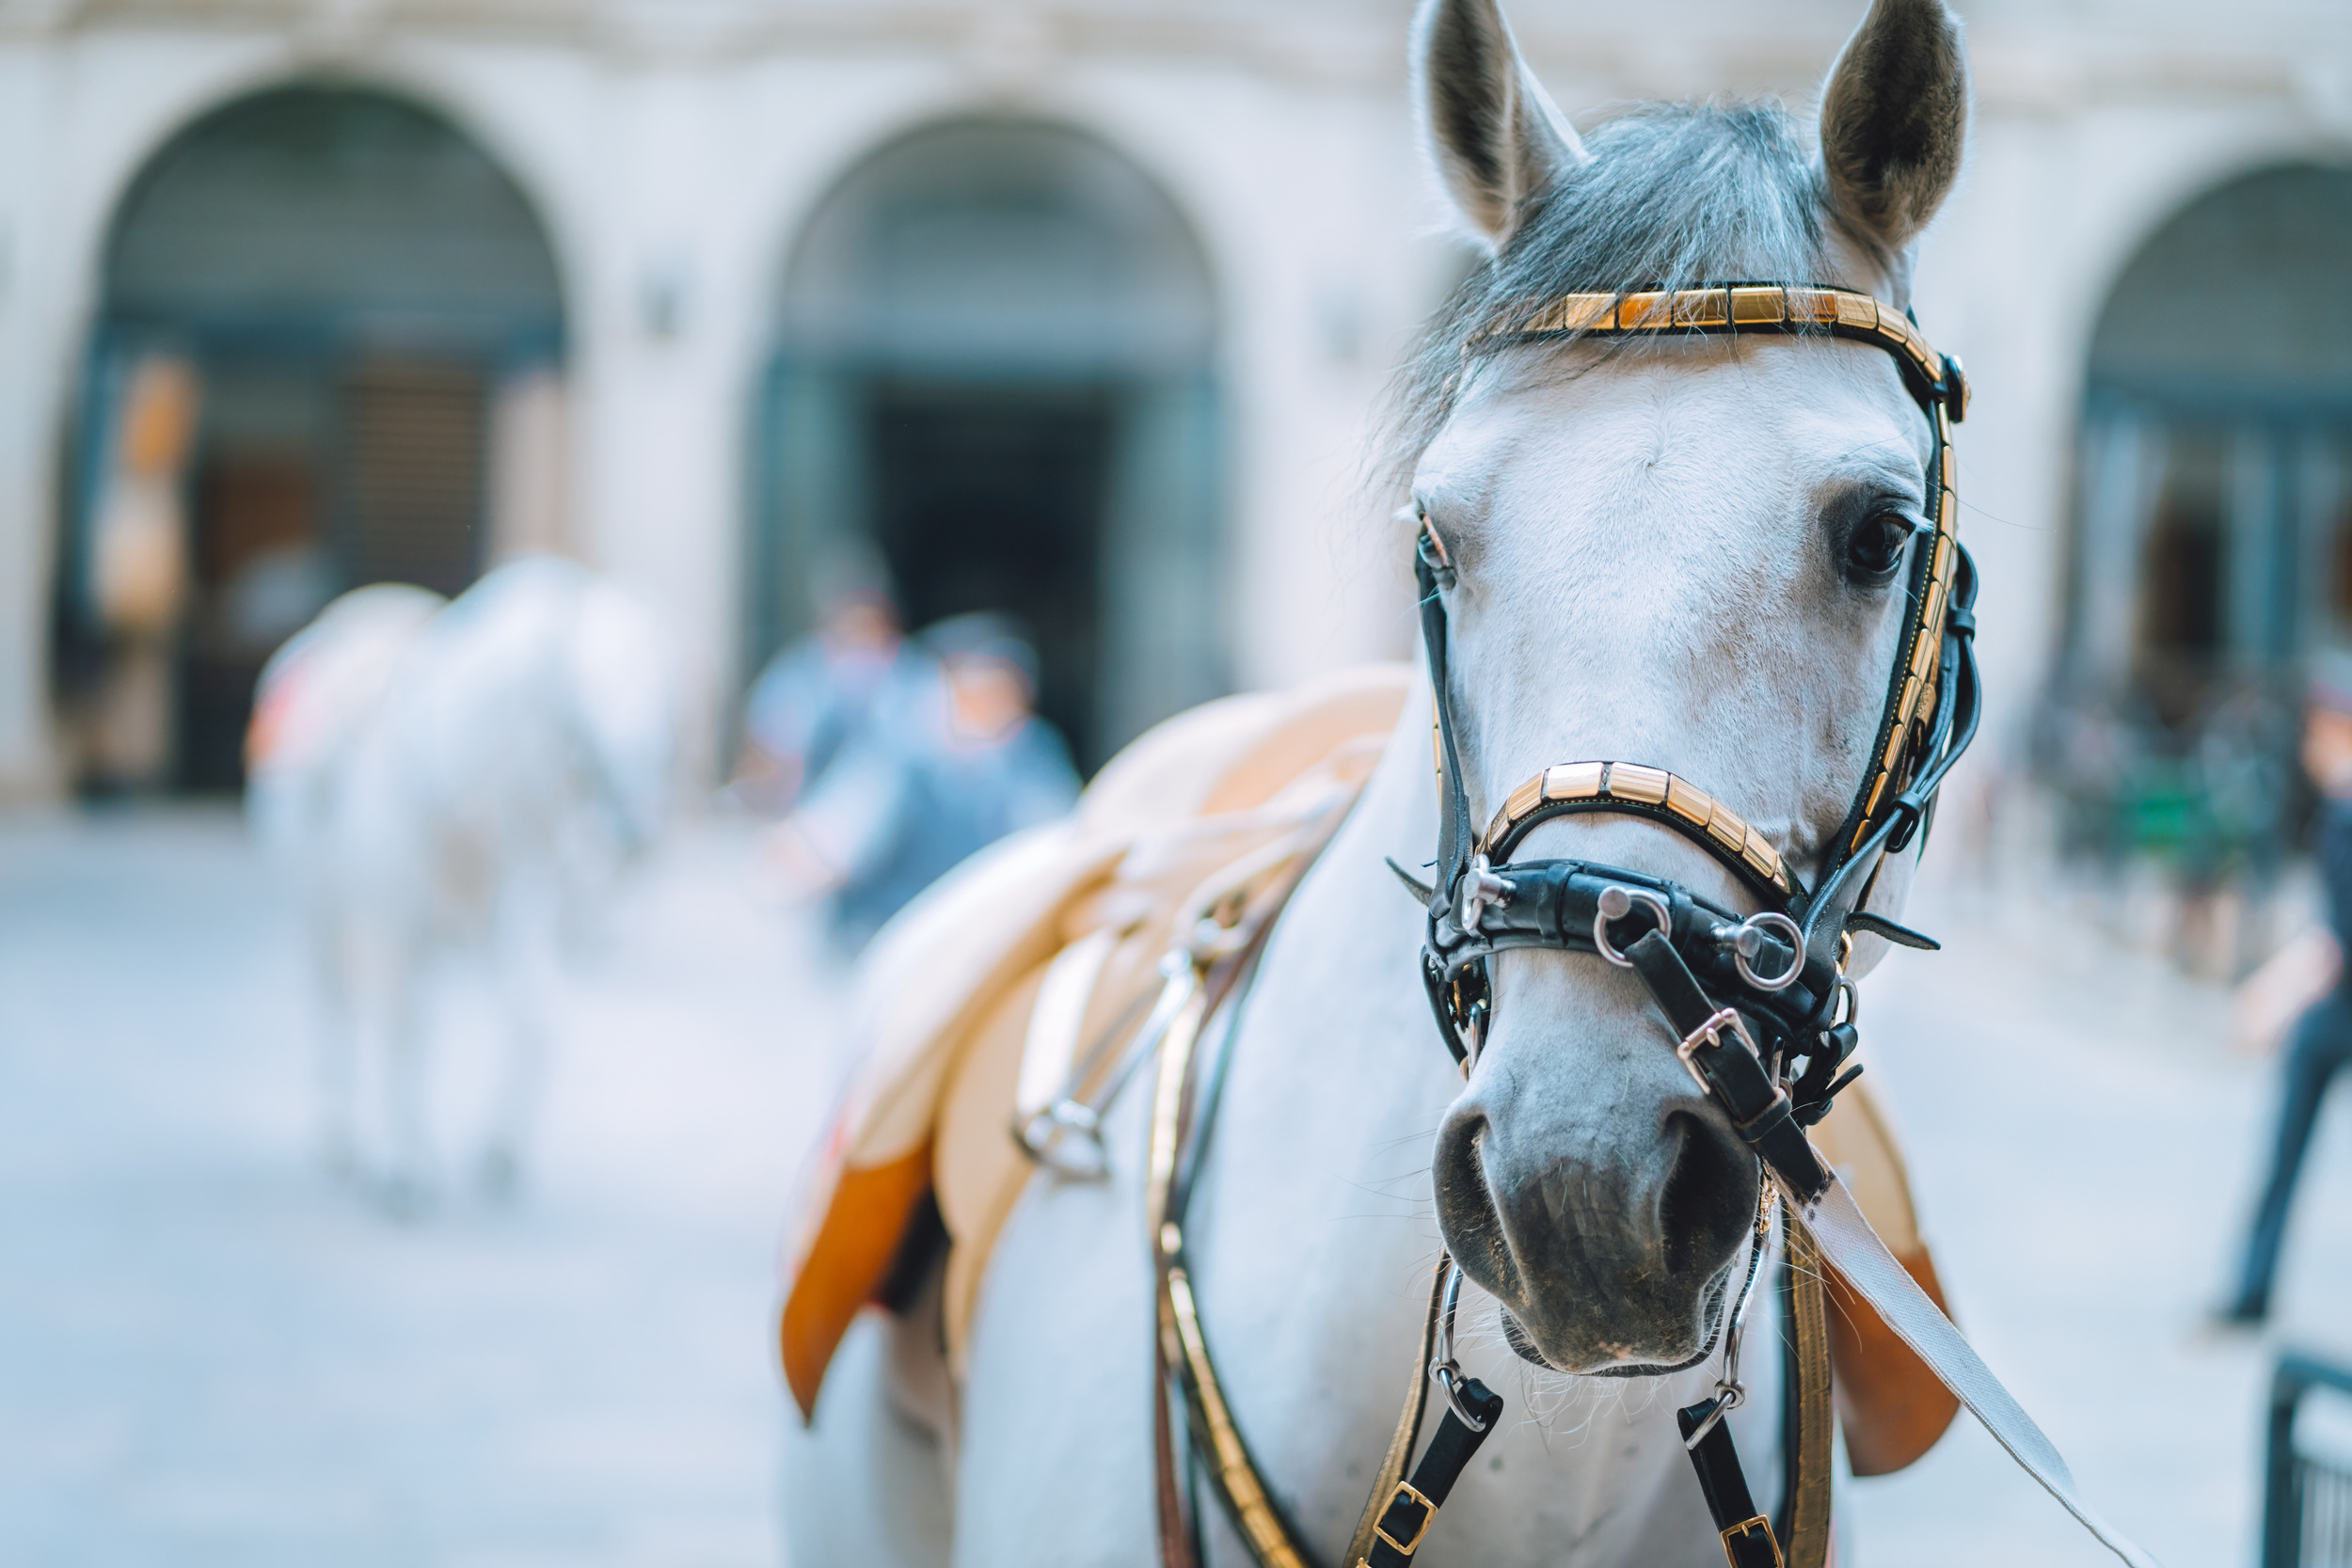 <p>The Lipizzaner was bred during the heyday of the Austro-Hungarian Empire in what is now Slovenia. However, Vienna is the best place to see the horses, home to the Spanish Riding School, which puts on frequent shows. A large stud is also near Graz, in the south of Austria.</p><p><a href='https://www.msn.com/en-us/community/channel/vid-cj9pqbr0vn9in2b6ddcd8sfgpfq6x6utp44fssrv6mc2gtybw0us'>Follow us on MSN to see more of our exclusive lifestyle content.</a></p>